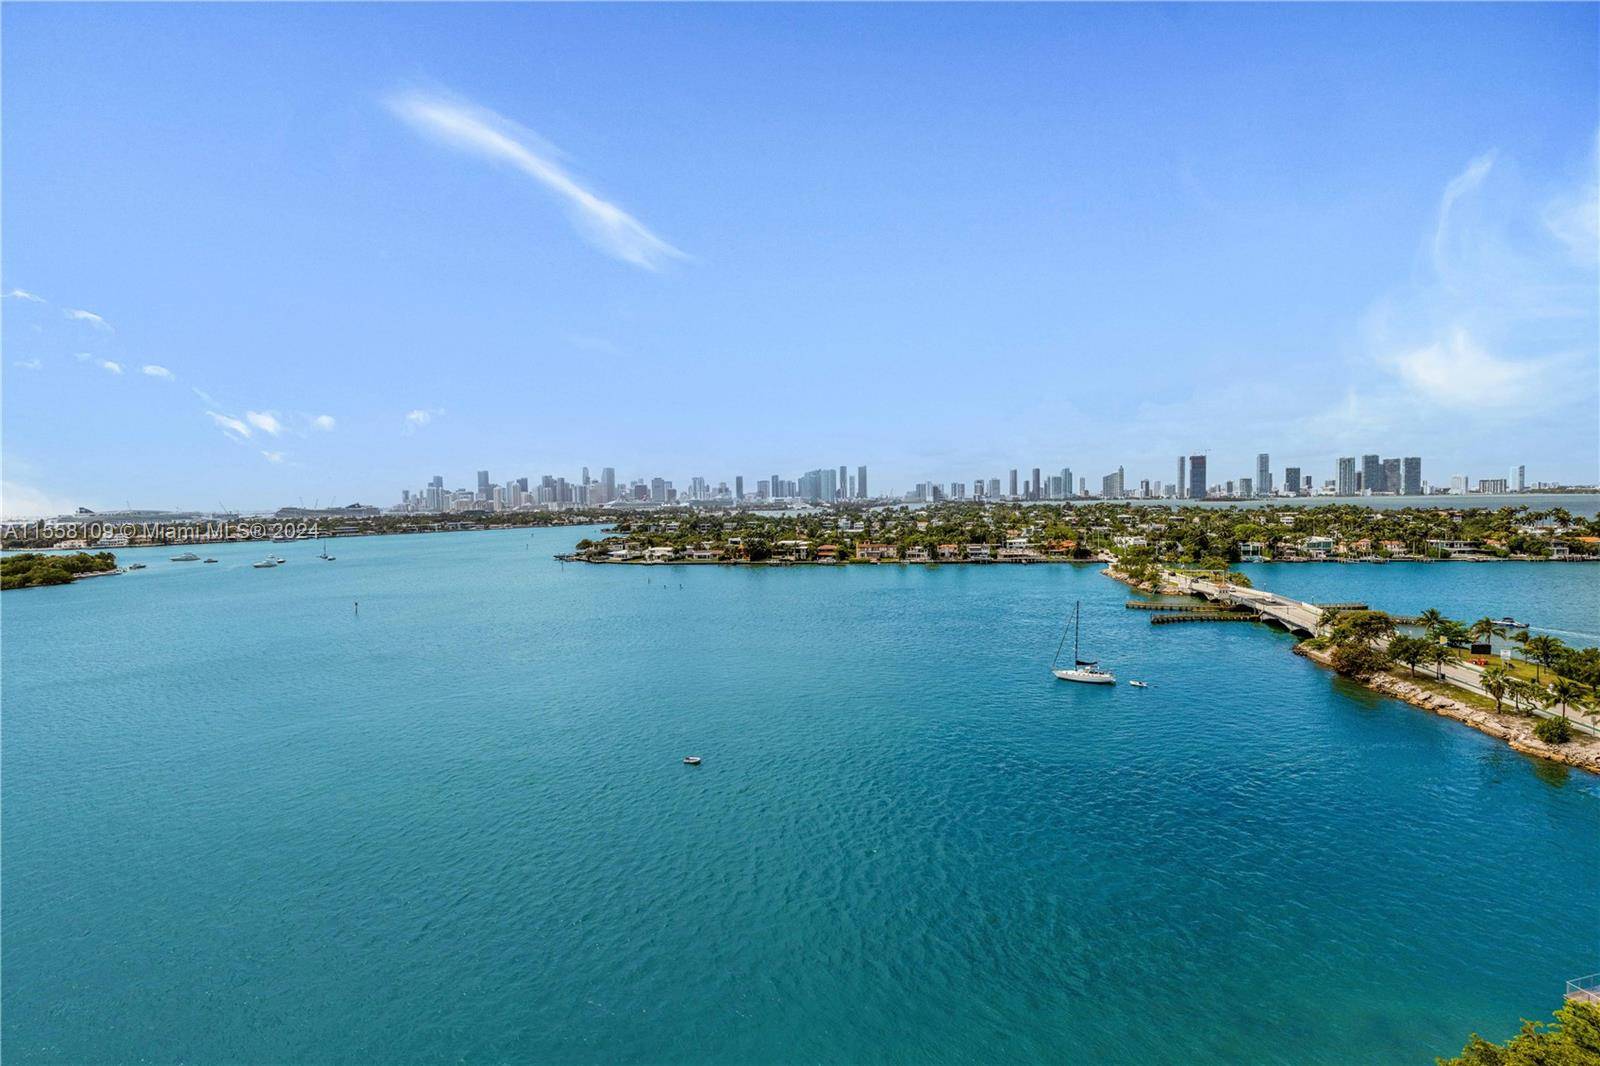 FULLY RENOVATED FURNISHED LOWER PENTHOUSE WITH ENDLESS BAY VIEWS AT VENETIAN ISLANDS.